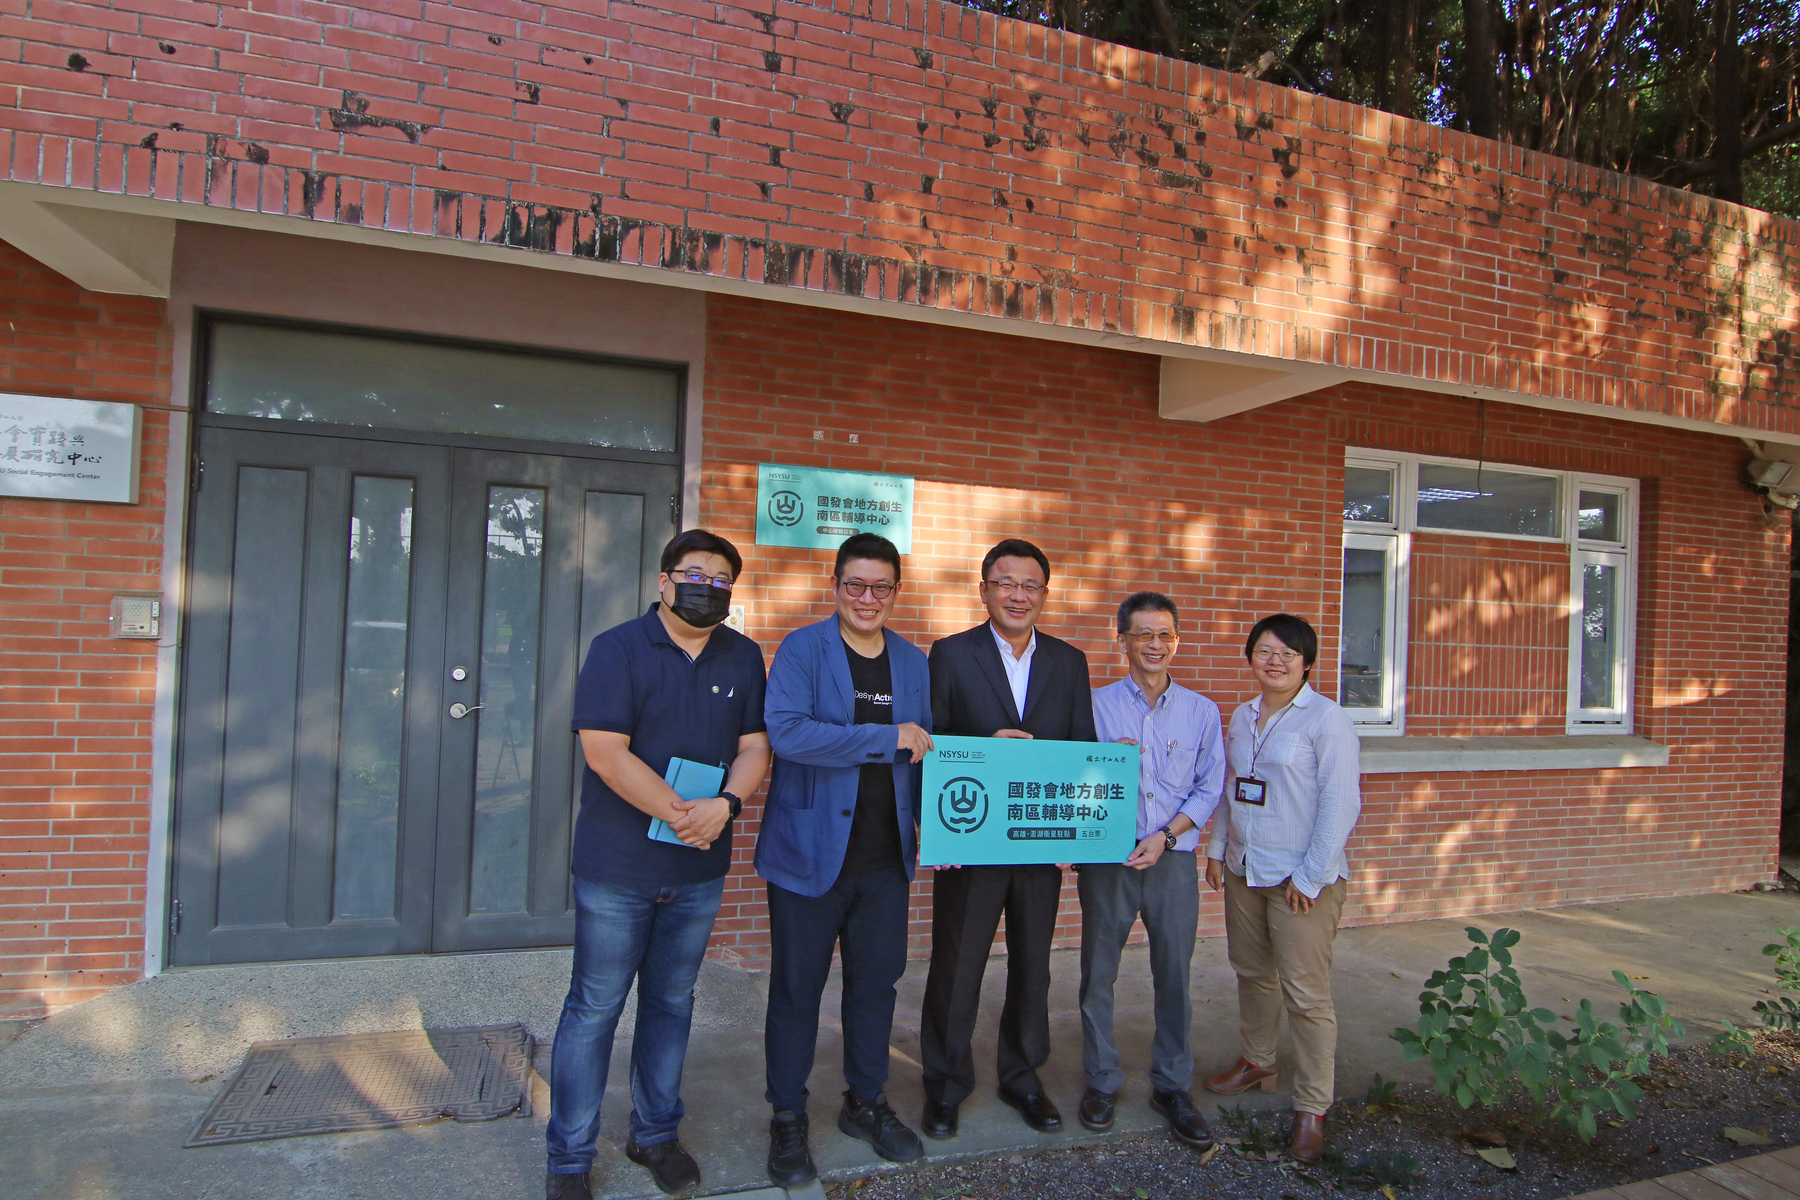 Host of the Regional Revitalization Counseling Center of Southern Area project – Senior Vice President of NSYSU I-Yu Huang (in the middle), Co-Host Associate Dean of the College of Management Jui-Kun Kuo (second from the right), Executive Director Han-Yu Wu (first from the right), Regional Co-Host Kevin Yang – the Executive Director of 5% Design Action – Social Design Platform (second from the left), Assistant Professor of the Institute of Public Affairs Management Cheng-Hsun Hsieh (first from the right)T